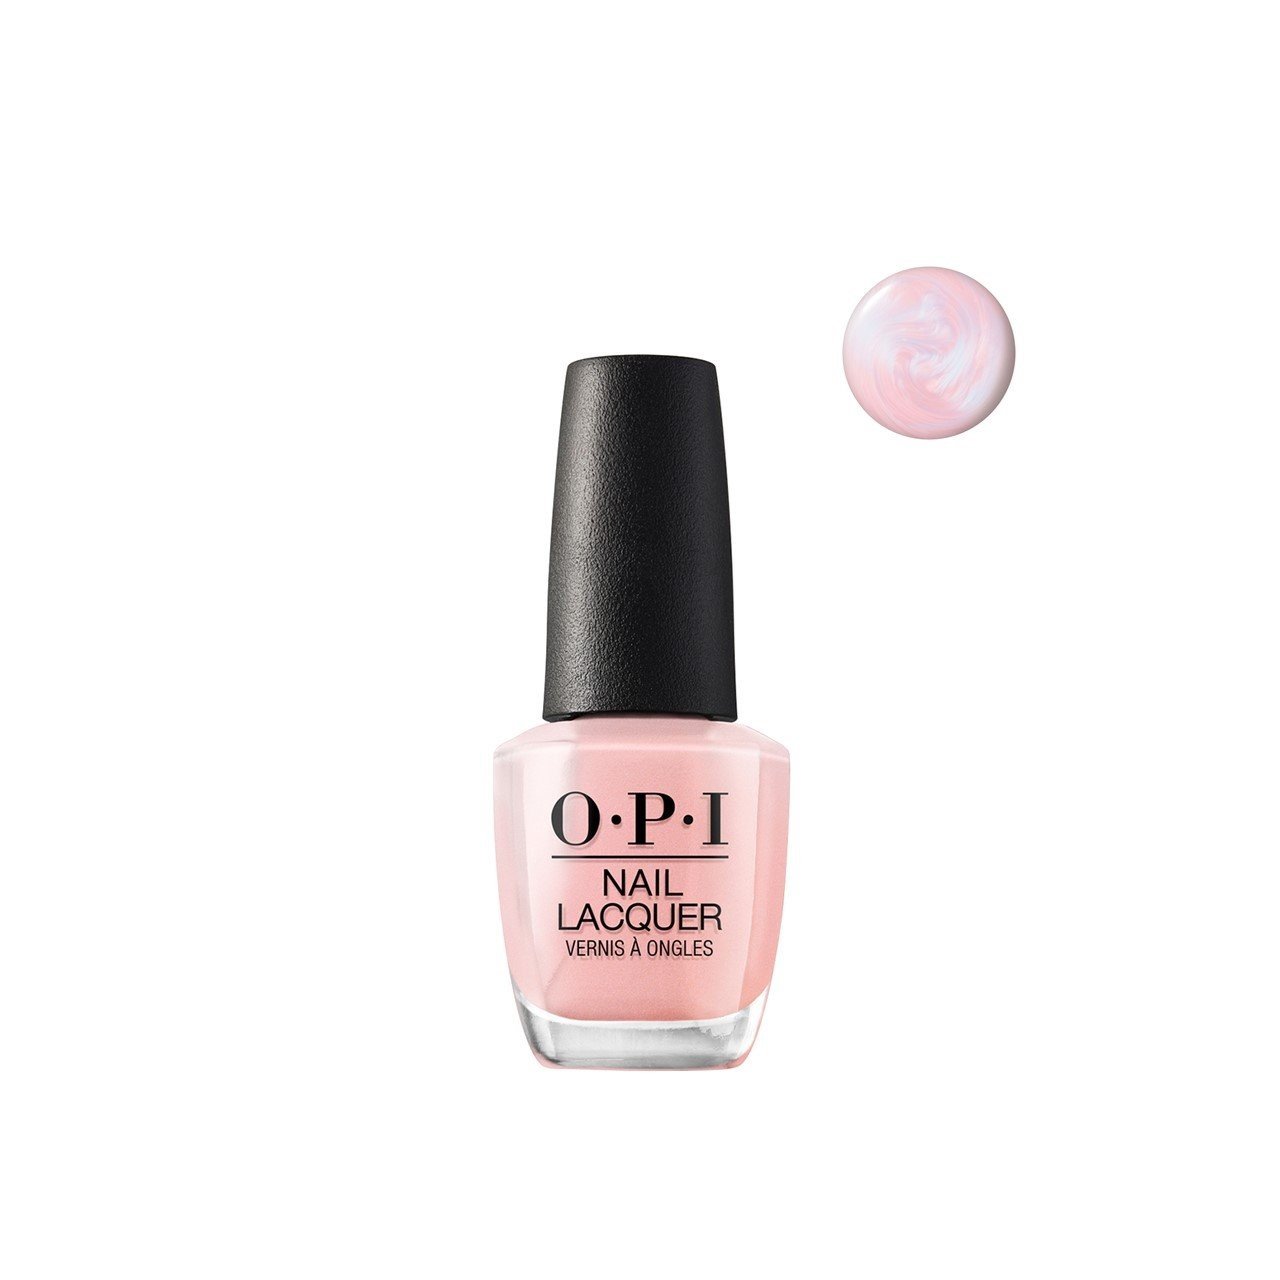 25 OPI Nail Polishes With Names As Fun As Their Colors